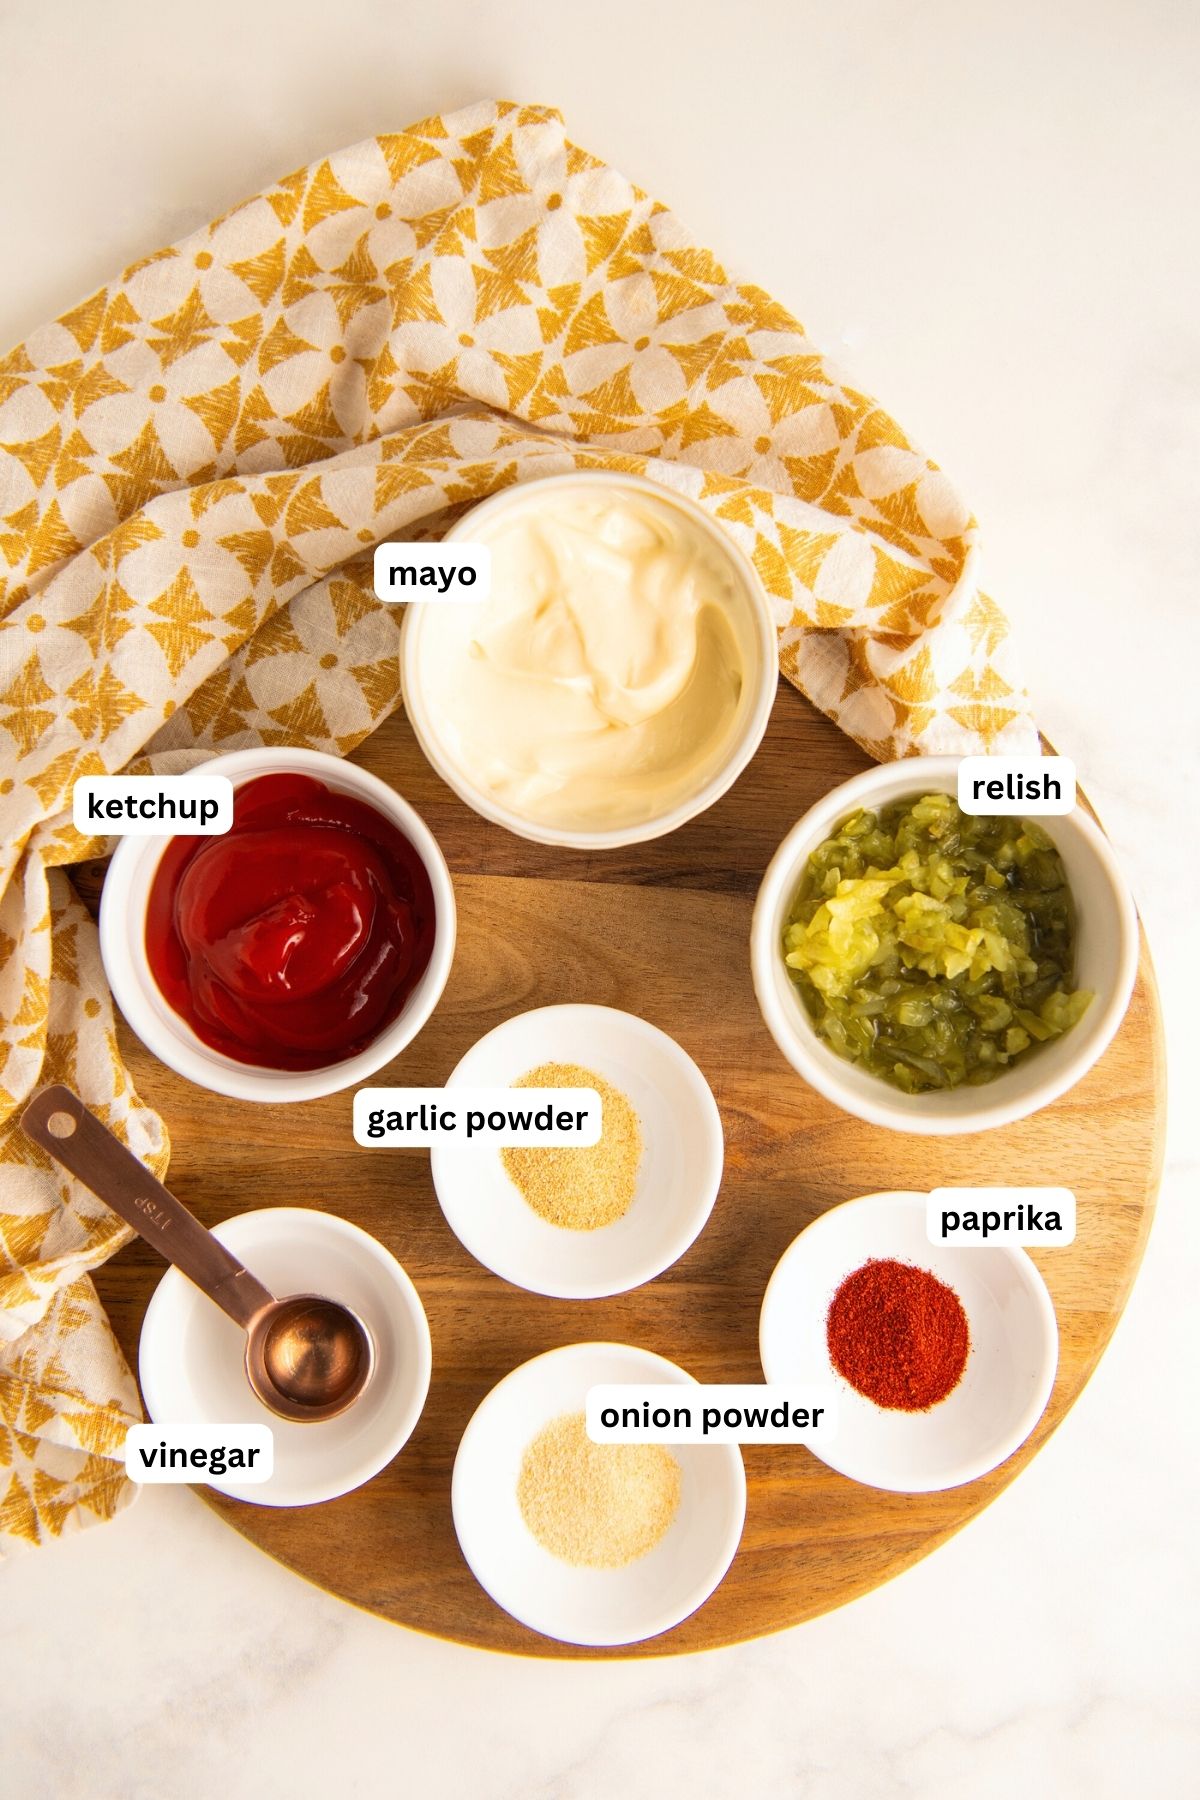 Ingredients for copycat In-N-Out sauce recipe arranged in bowls. From top to bottom: mayo, ketchup, relish, garlic powder, vinegar, paprika and onion powder.